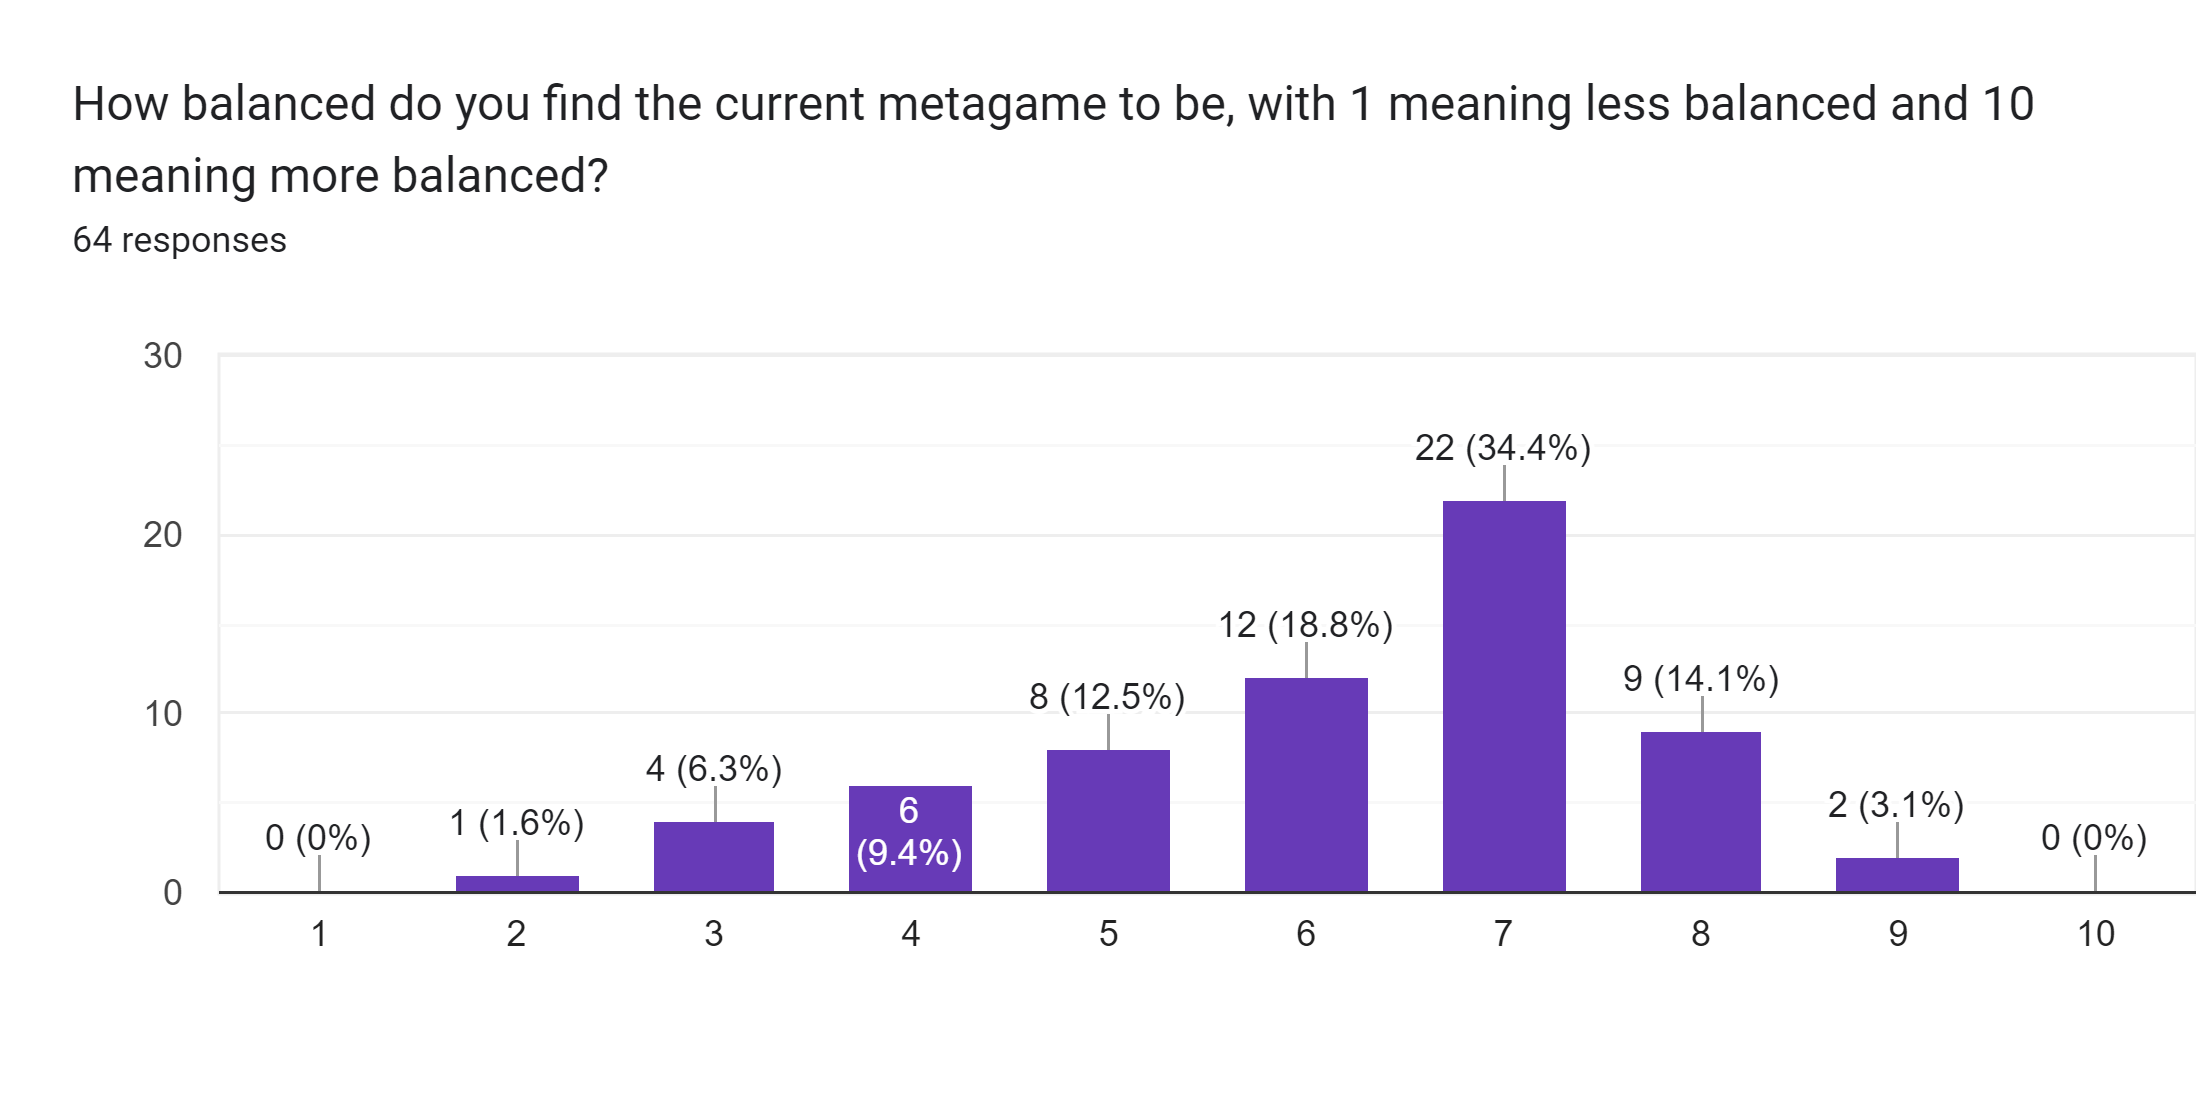 Forms response chart. Question title: How balanced do you find the current metagame to be, with 1 meaning less balanced and 10 meaning more balanced?. Number of responses: 64 responses.